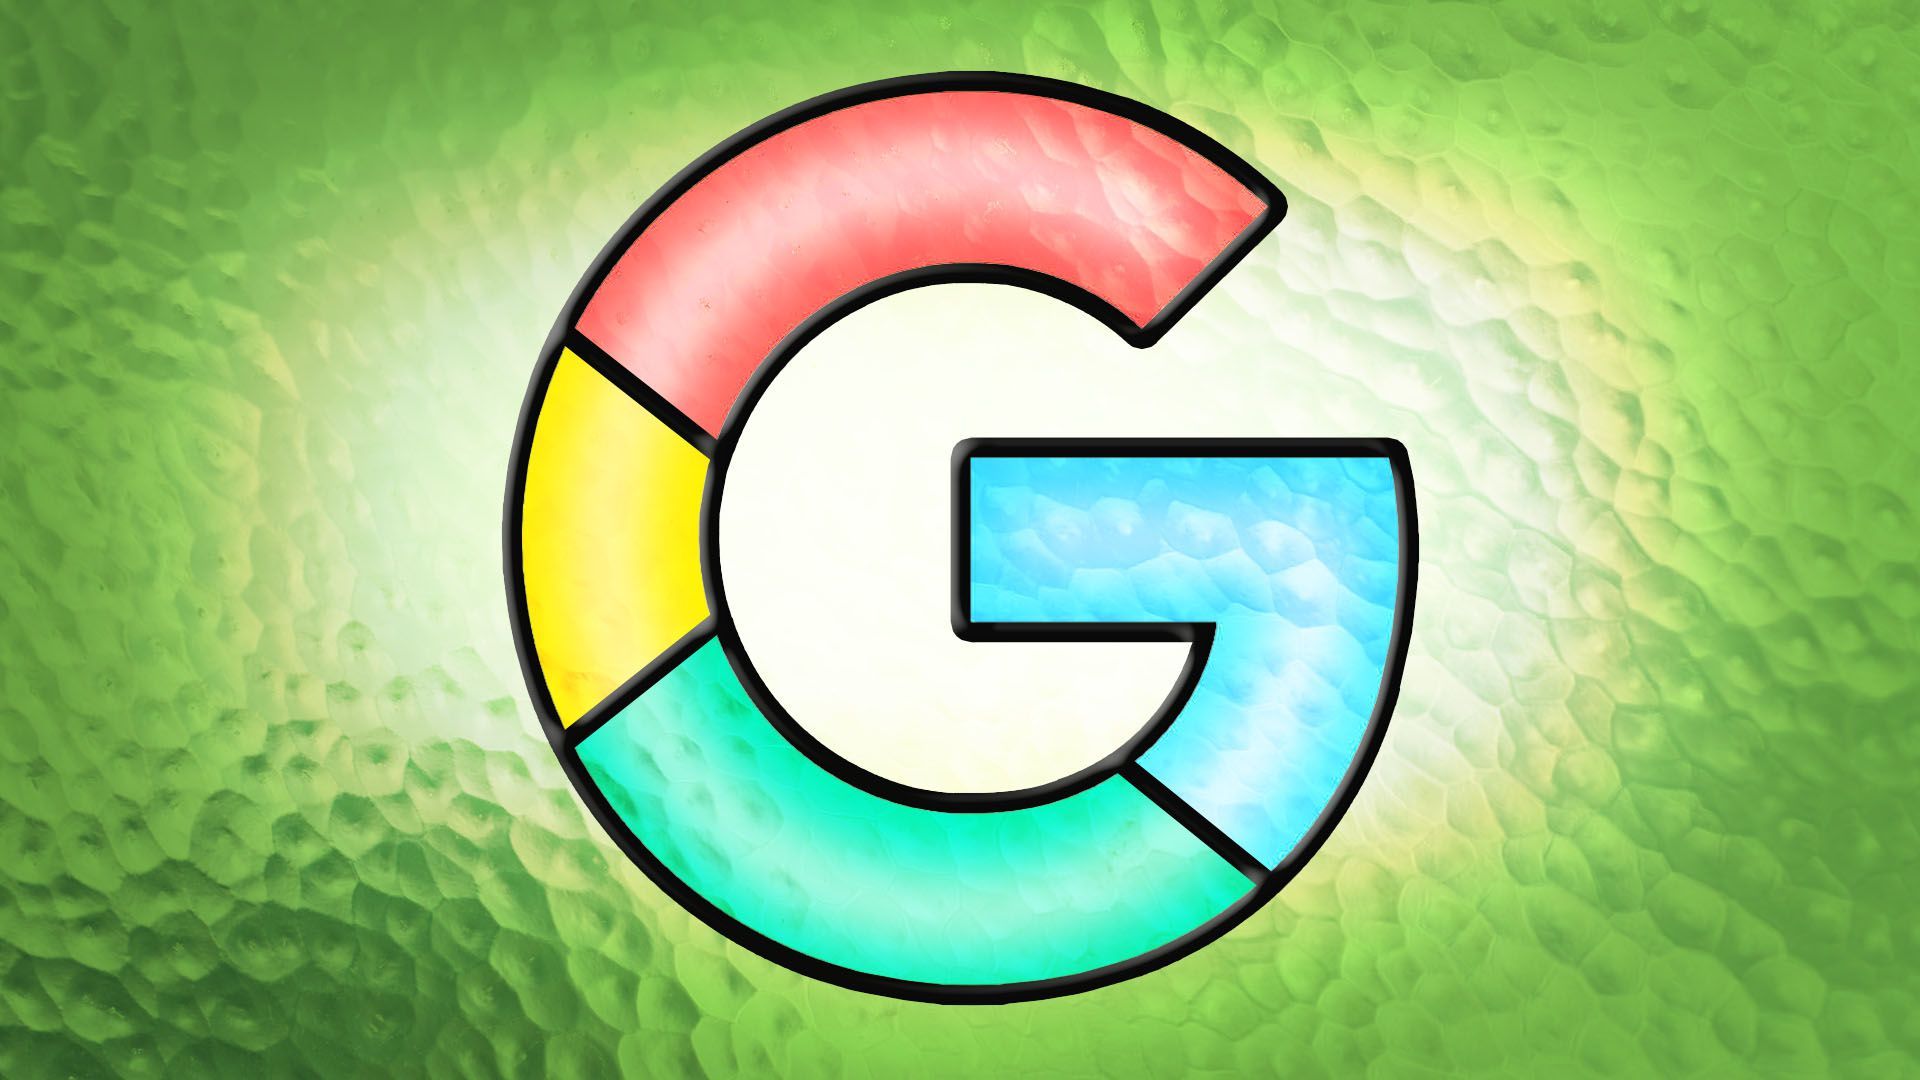 Illustration of the google logo as a stained glass window